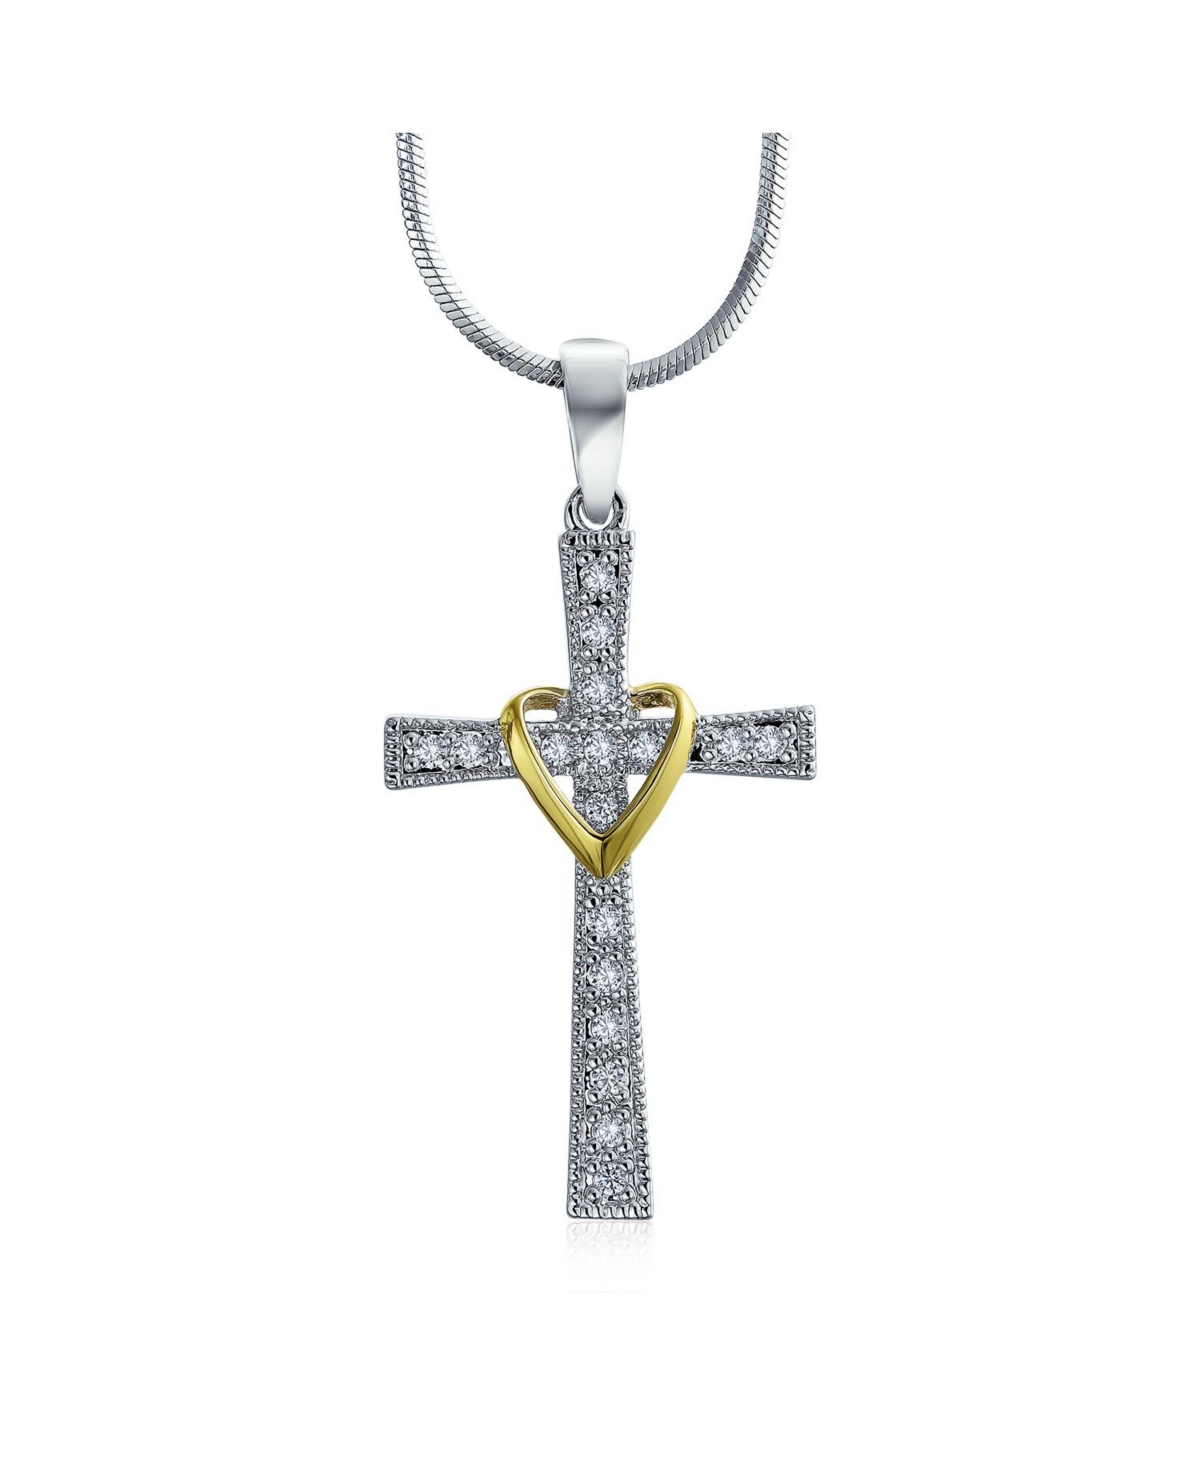 Cz Pave Accent Religious Love Of God Modern Fashion Heart & Infinity Cross Pendant Necklace For Women Teens Two Tone Rhodium Plated Brass - Silver